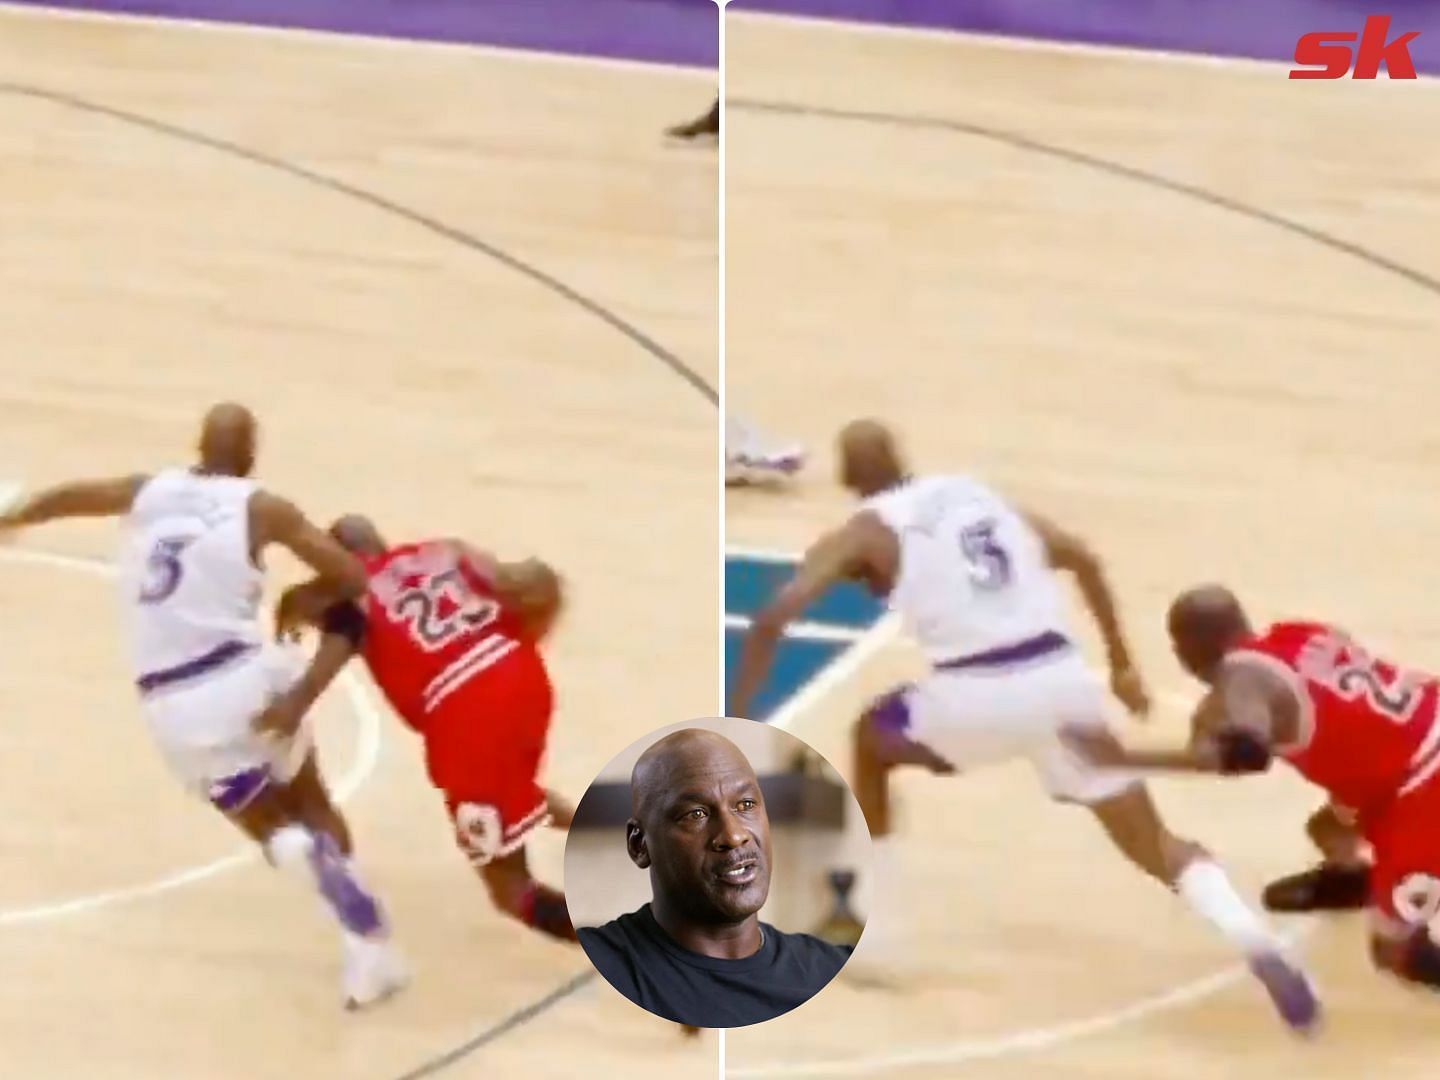 Michael Jordan reflects on the claims that he pushed Bryon Russell when he hit &quot;The Shot&quot;